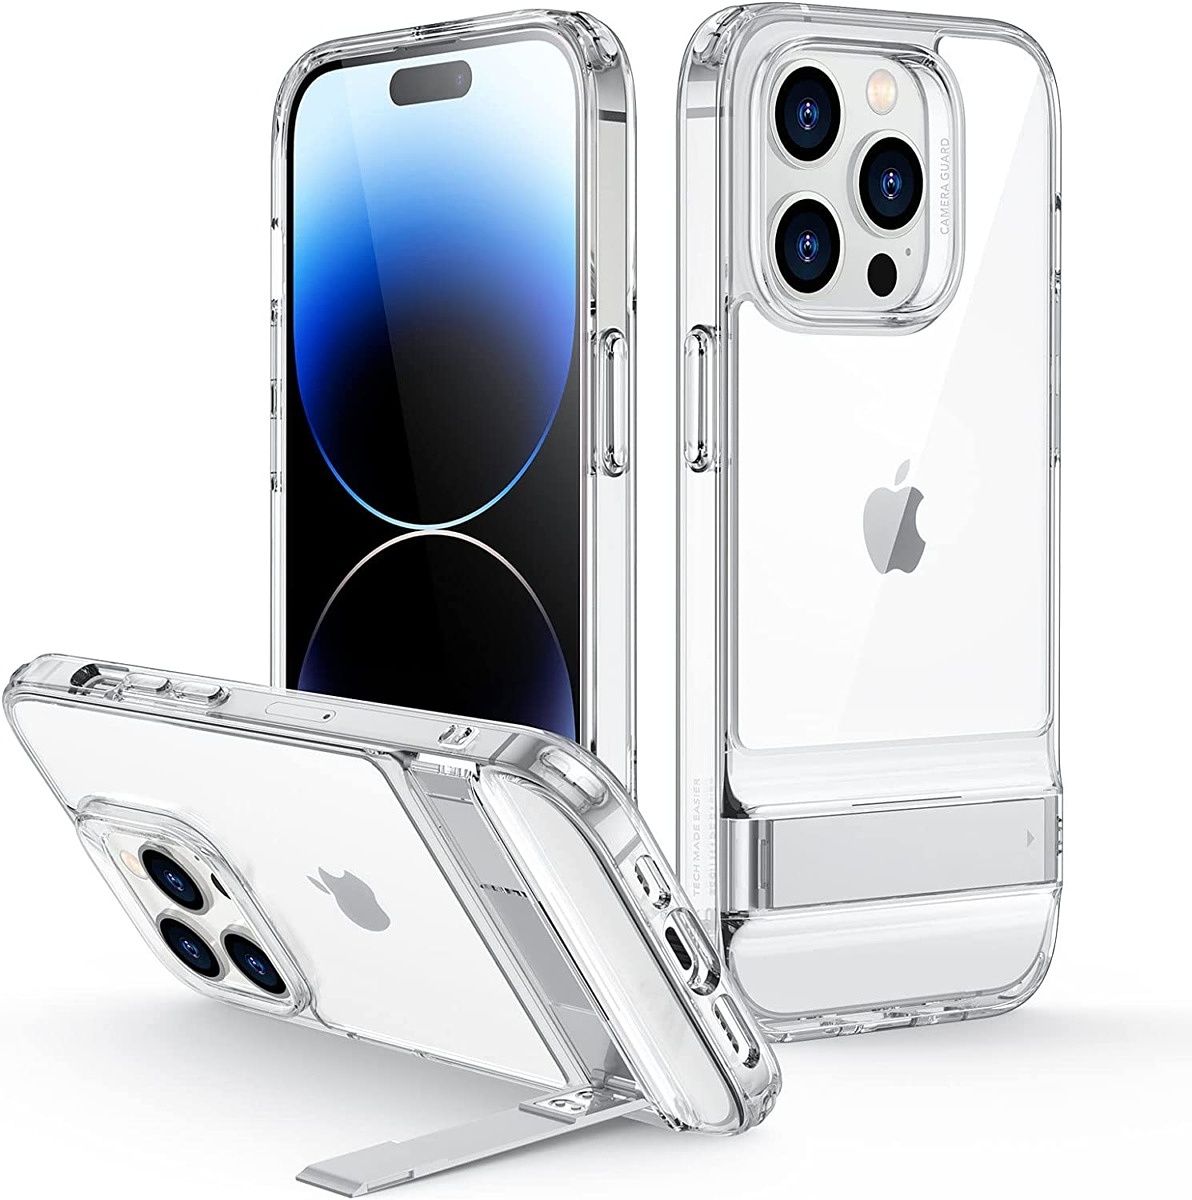 This clear case not only protects your phone from drops and scratches, but it also enables a hands-free viewing experience with its built-in freely-adjustble kickstand.